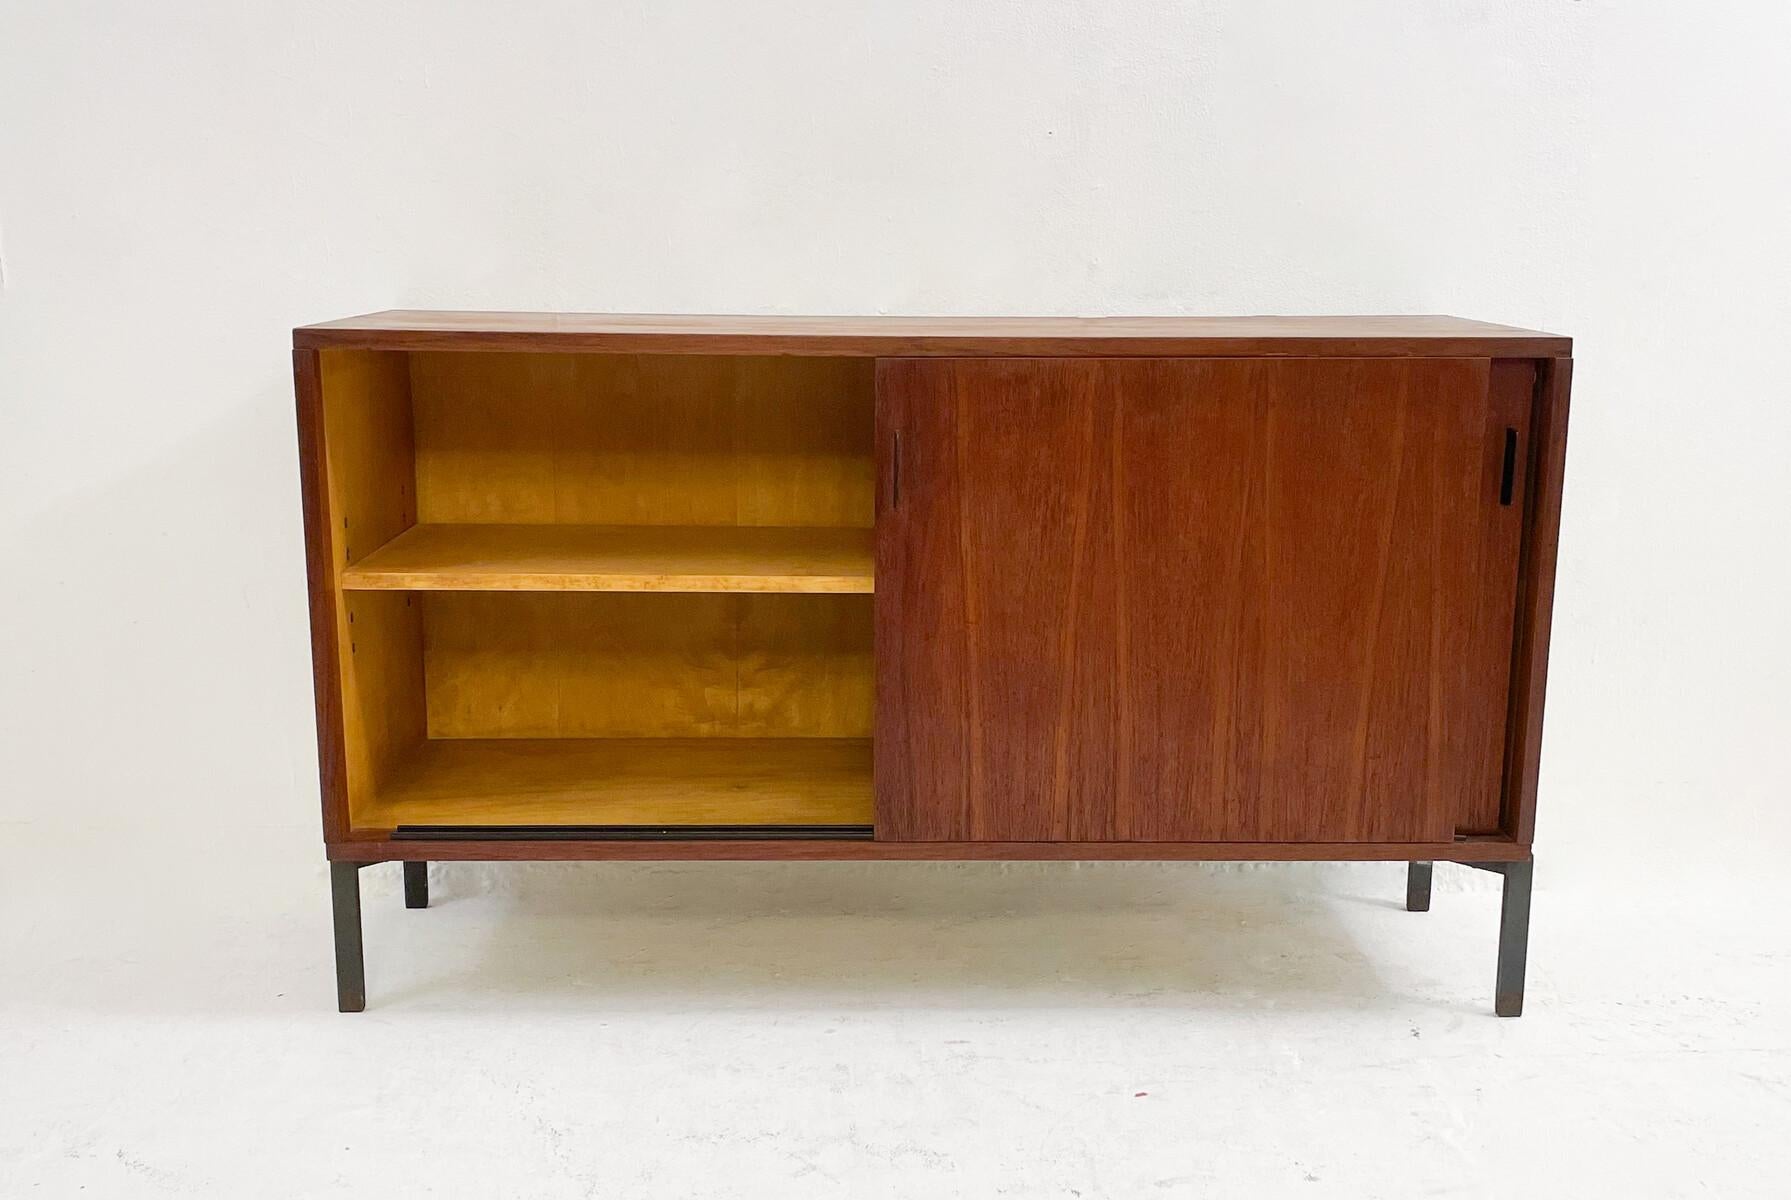 Mid-20th Century Mid-Century Modern Sideboard, Wood, Germany, 1960s - 2 Available For Sale